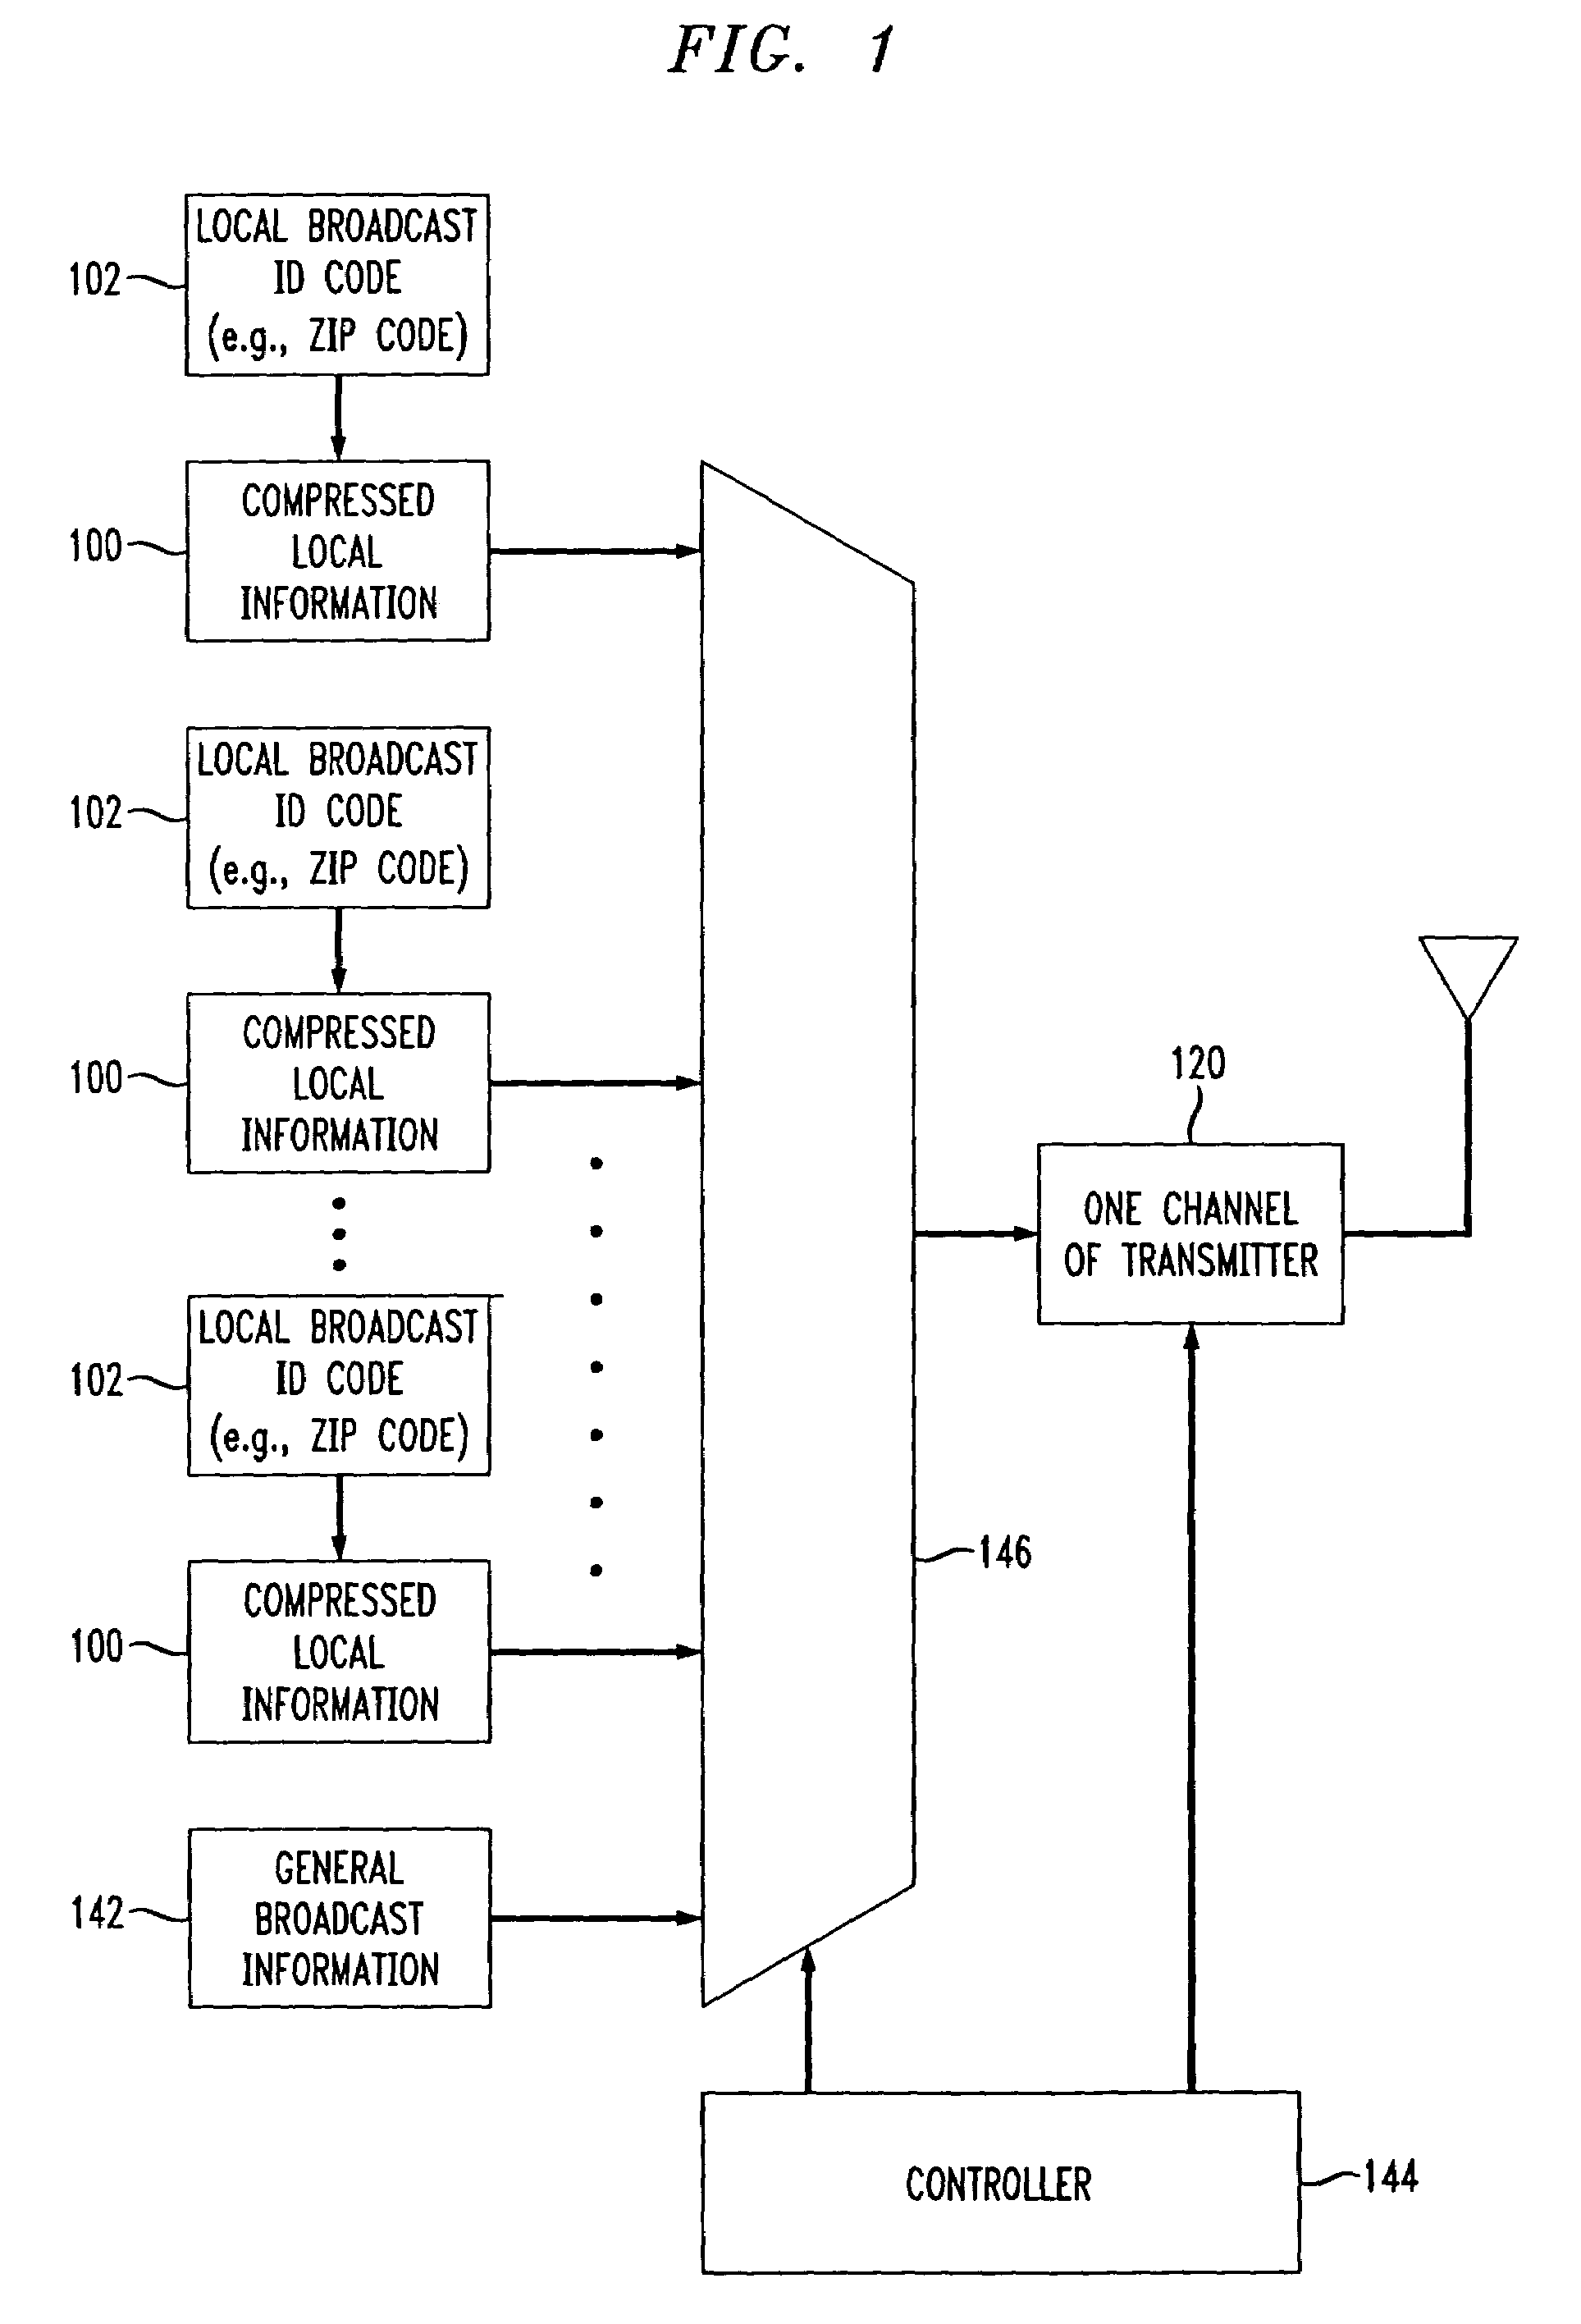 Digital audio broadcast system with local information